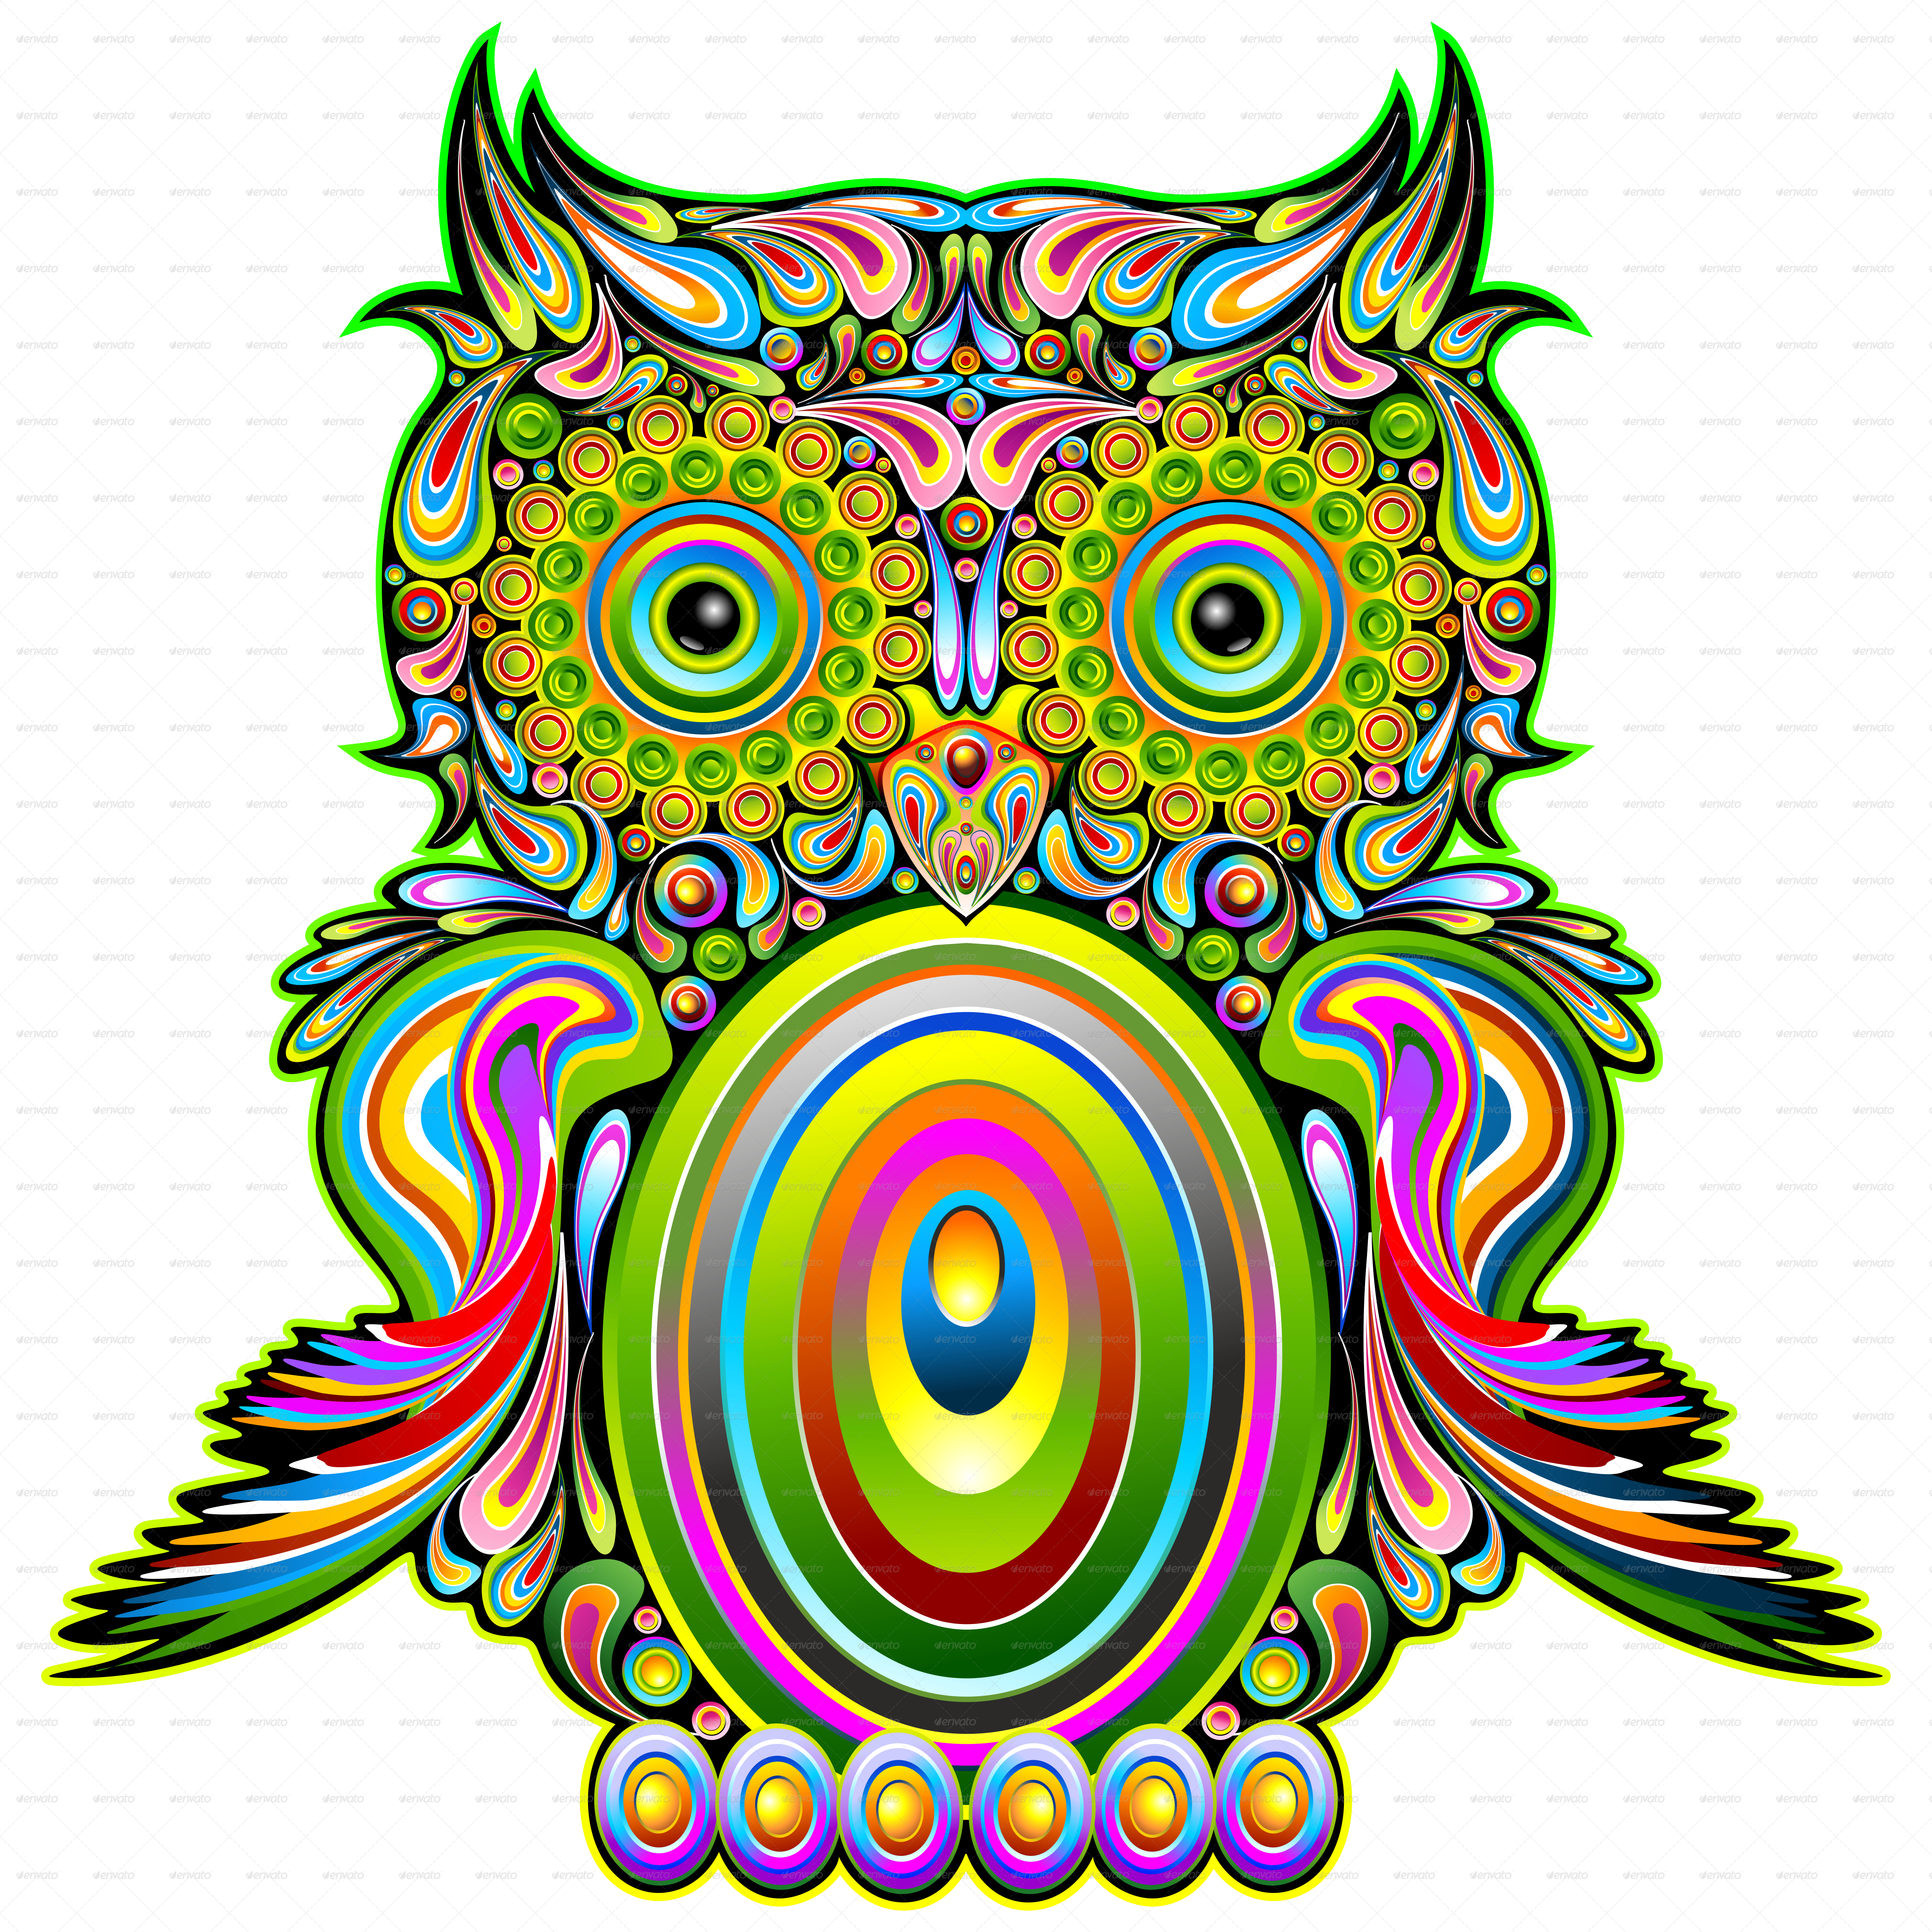 Owl Psychedelic Pop Art - Owl Psychedelic Art Design Canvas Print - Small (5000x5000)